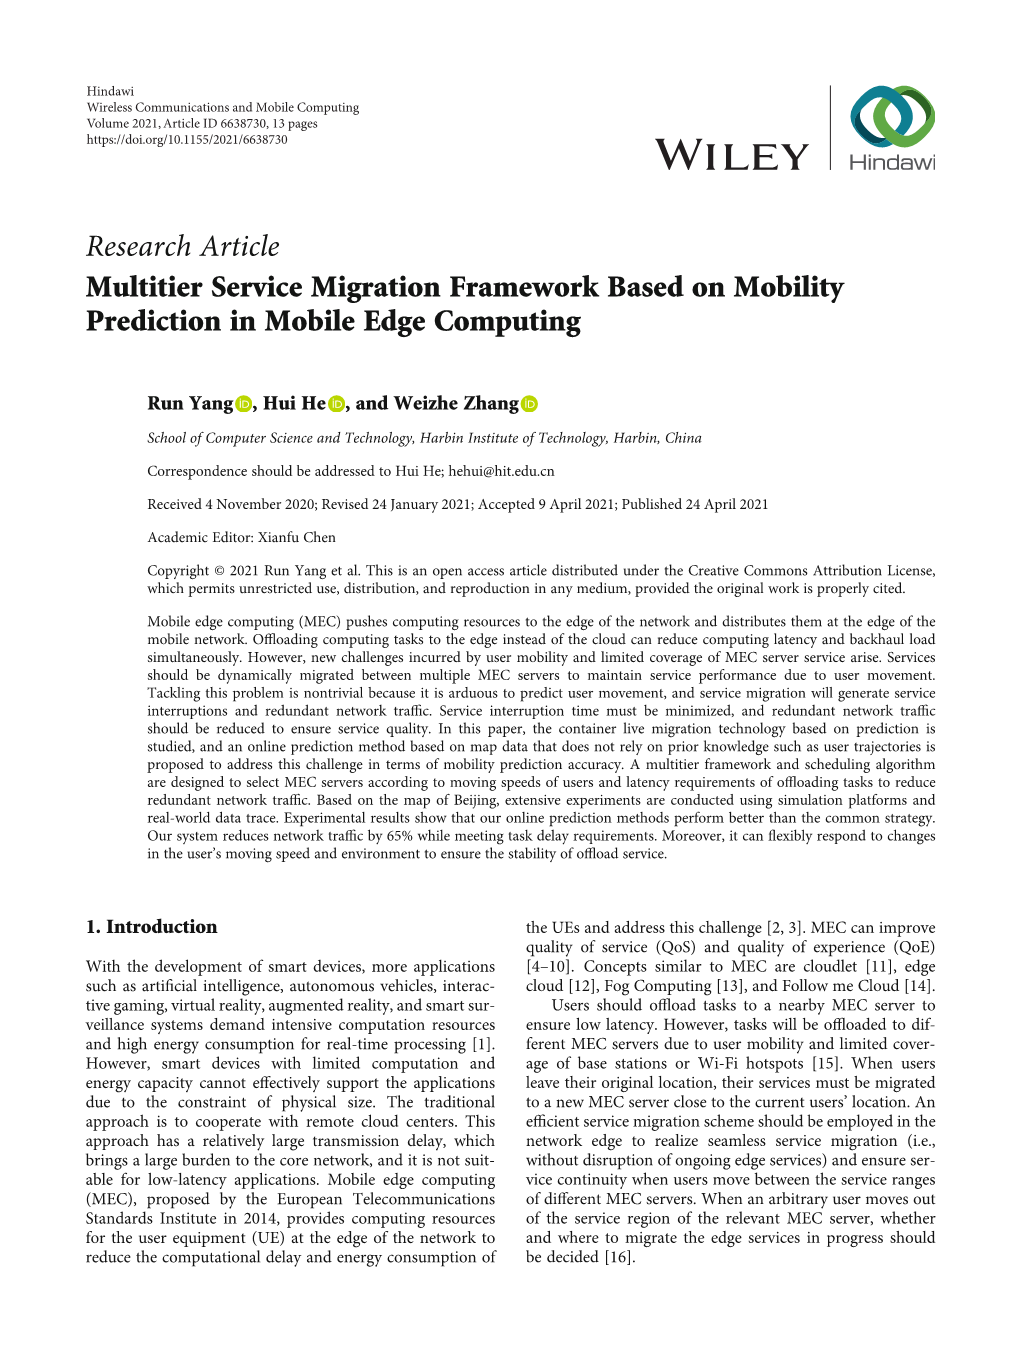 Multitier Service Migration Framework Based on Mobility Prediction in Mobile Edge Computing